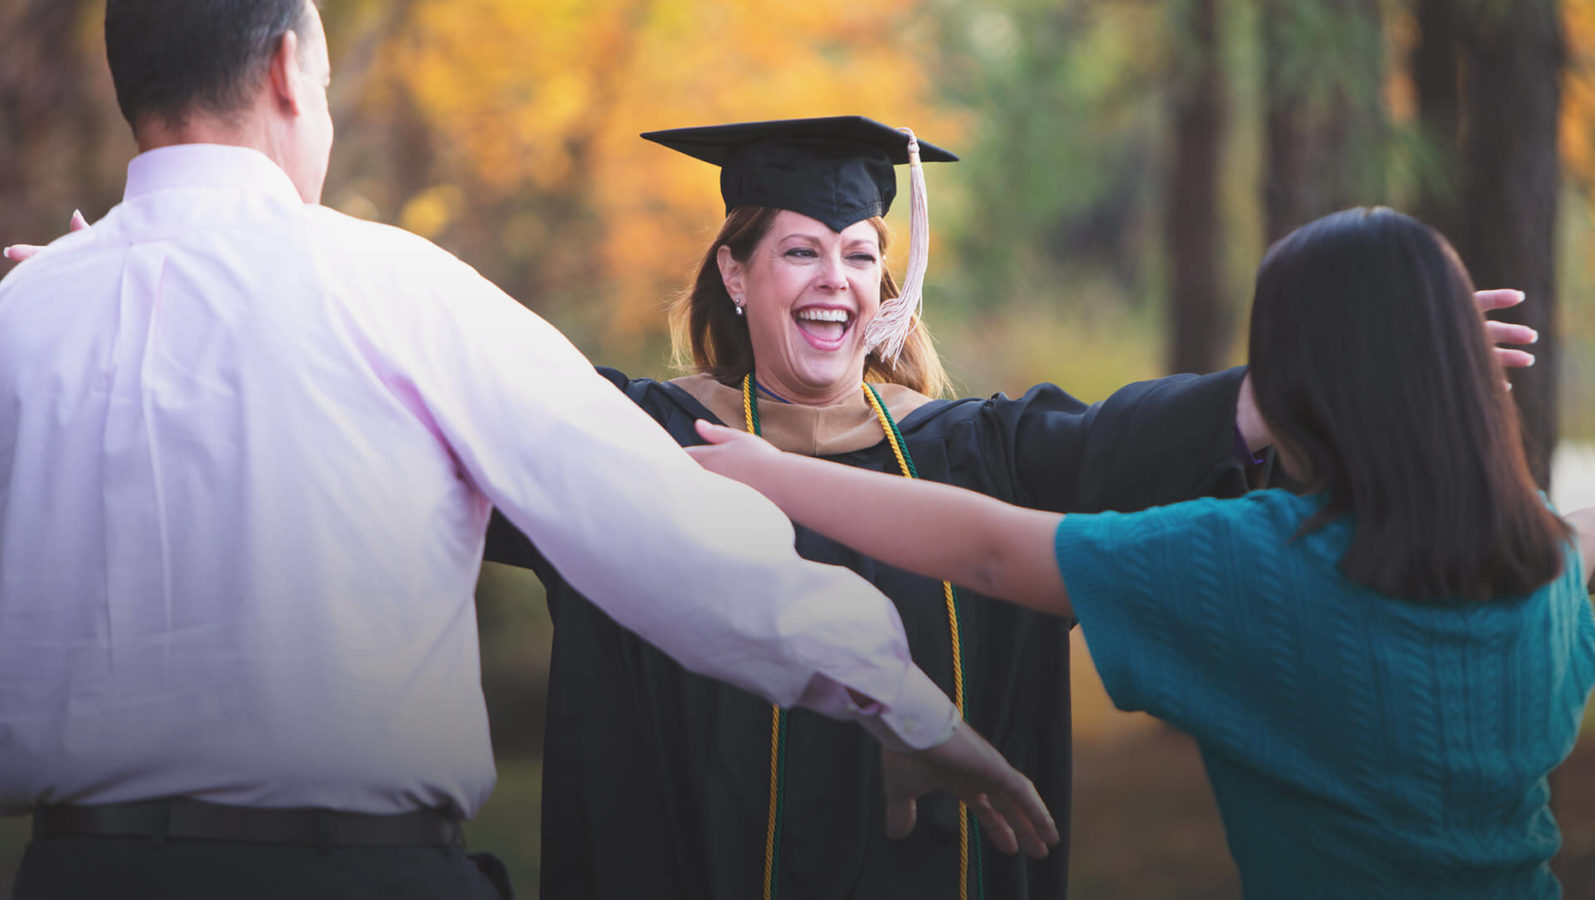 Mom in graduation robe greeting family with open arms